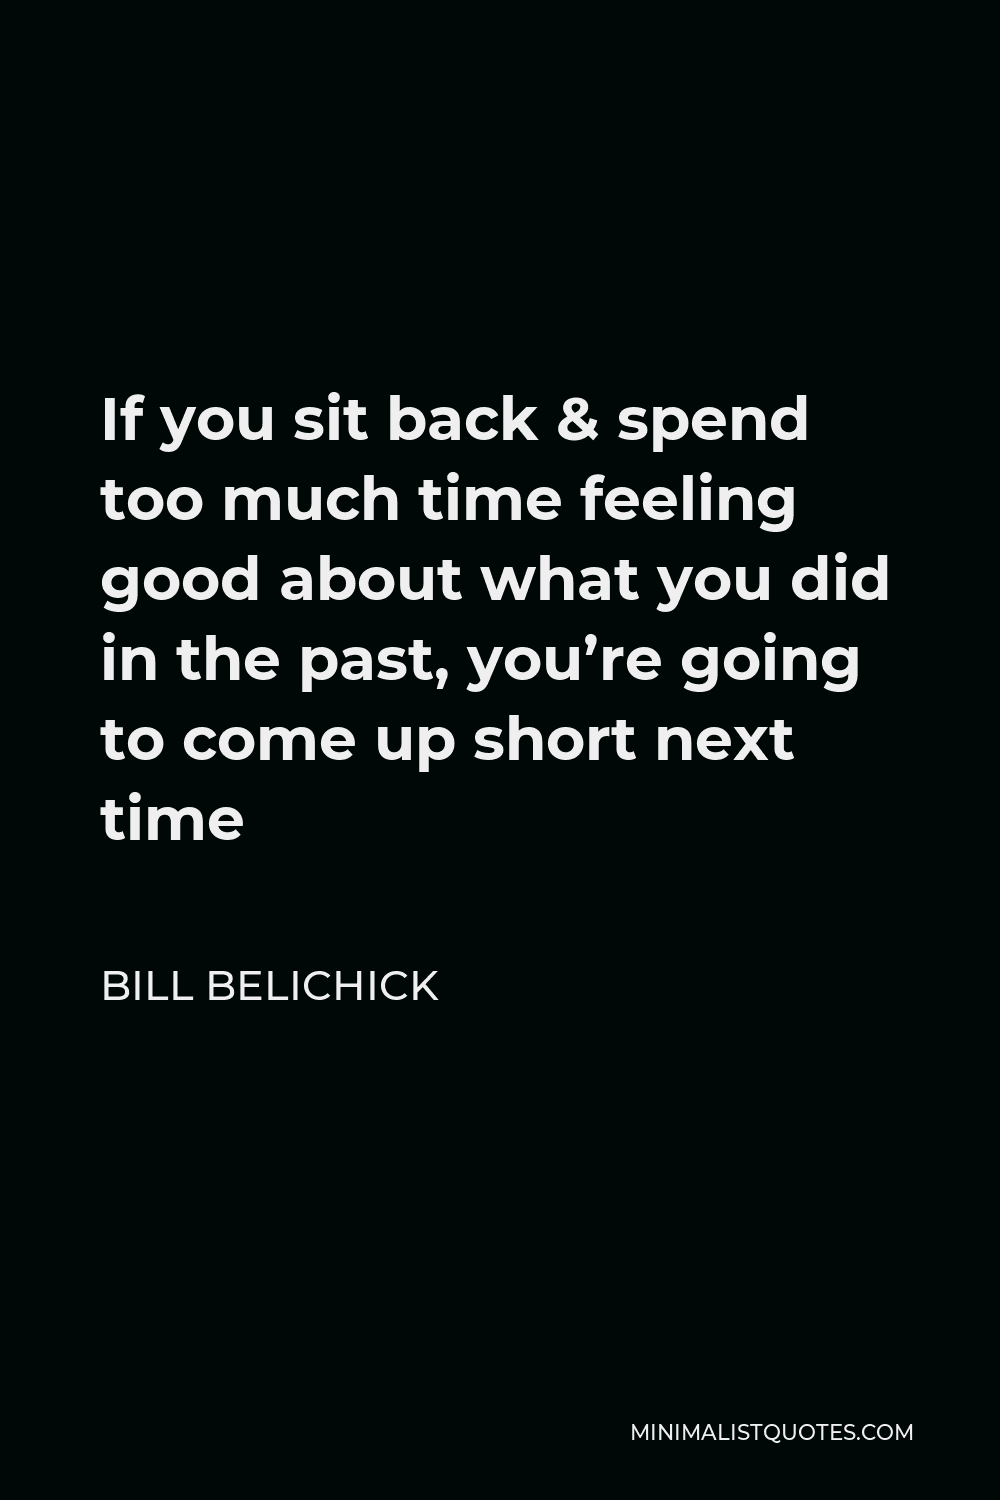 Bill Belichick Quote - If you sit back & spend too much time feeling good about what you did in the past, you’re going to come up short next time